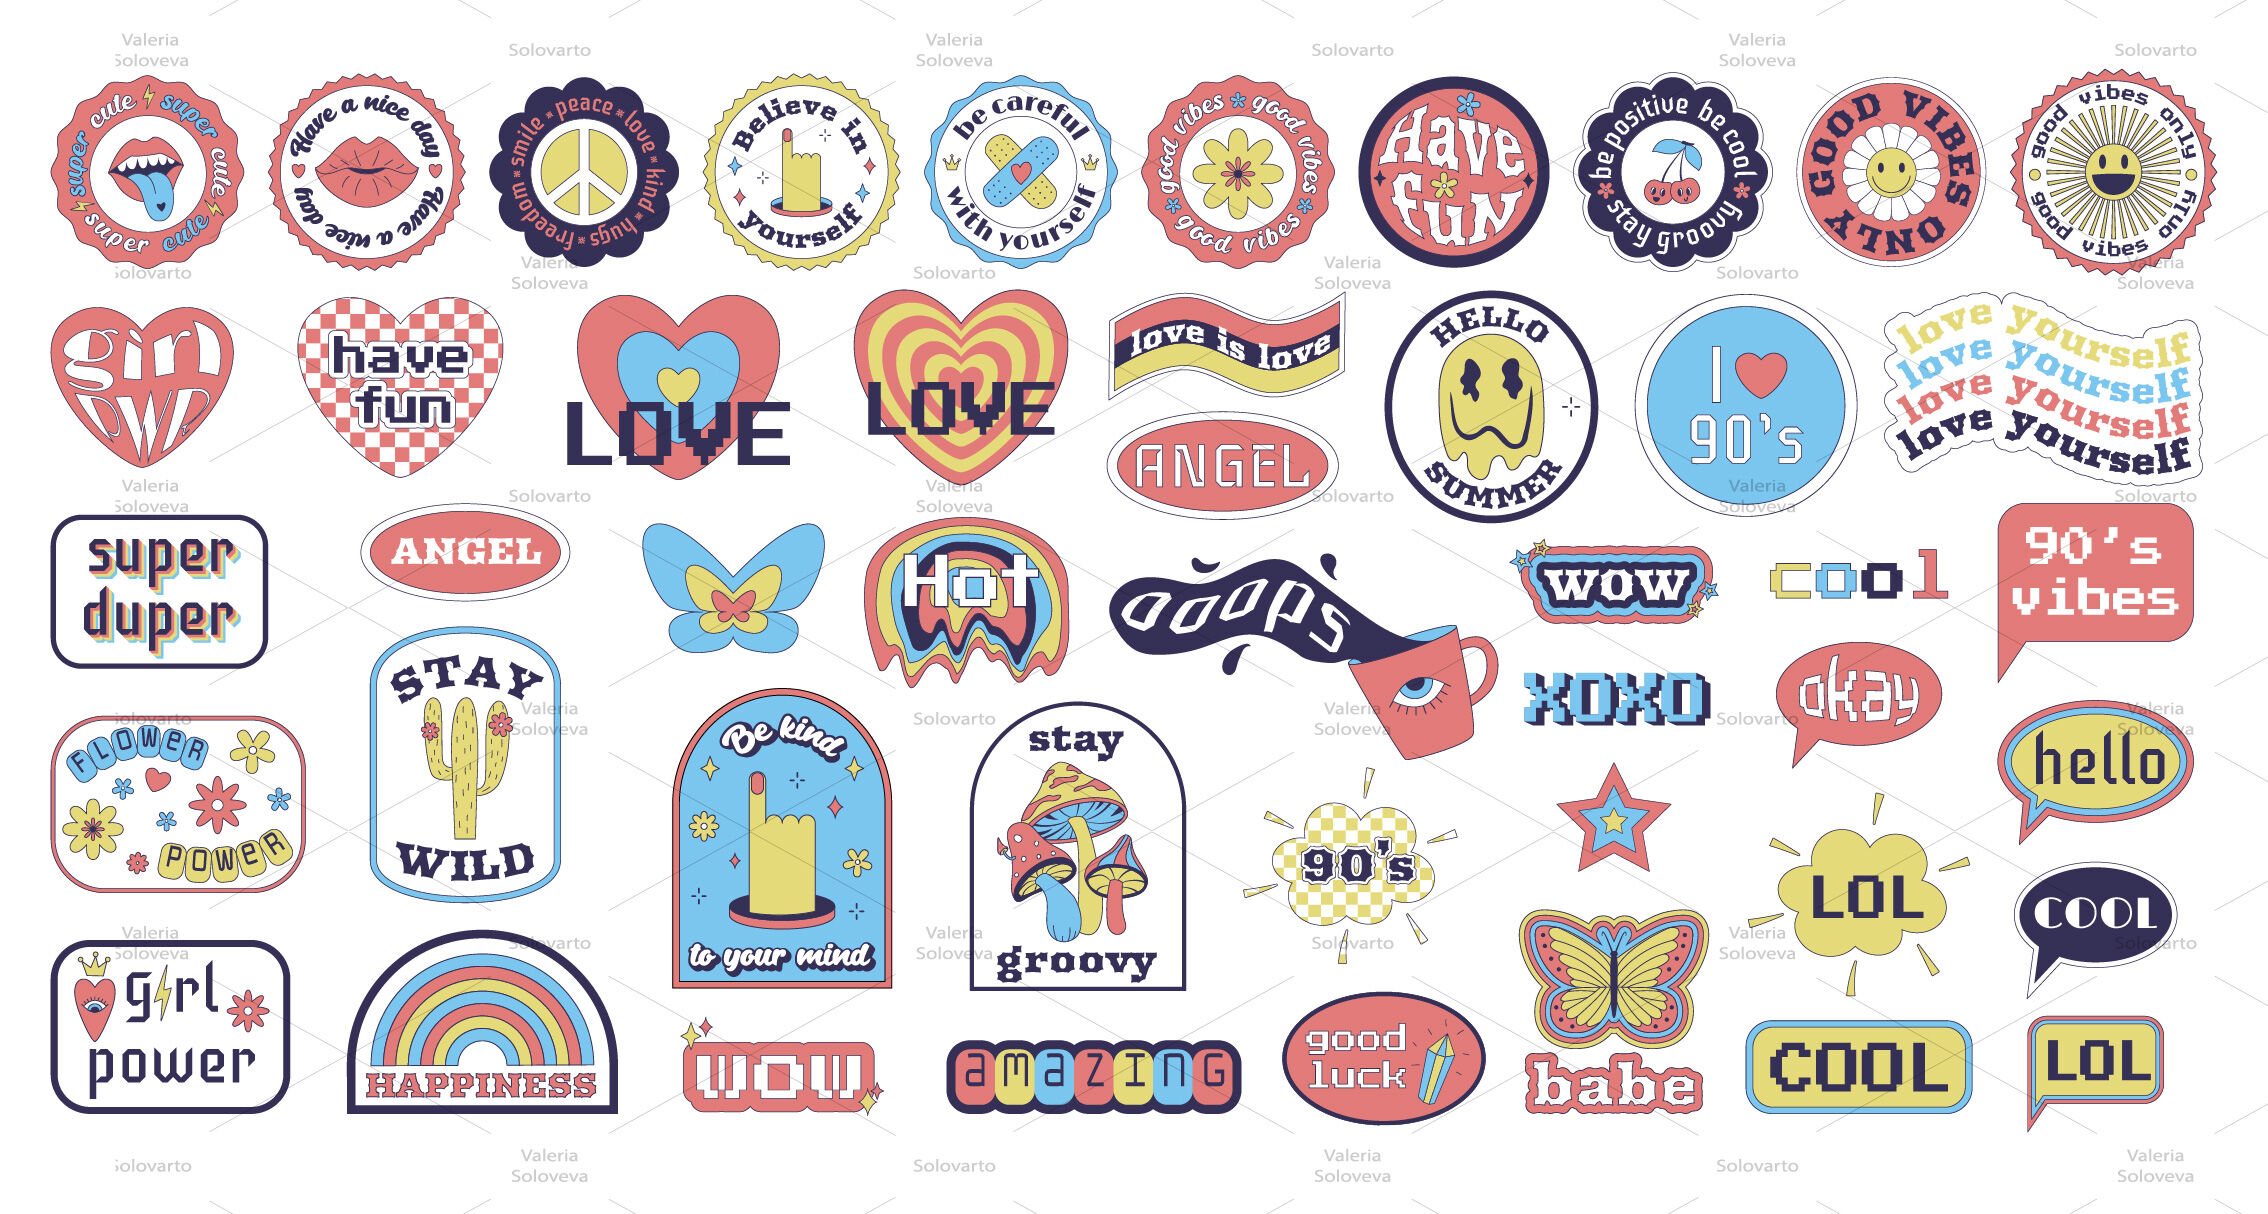 Y2K stickers with phrases JPG, PNG, EPS